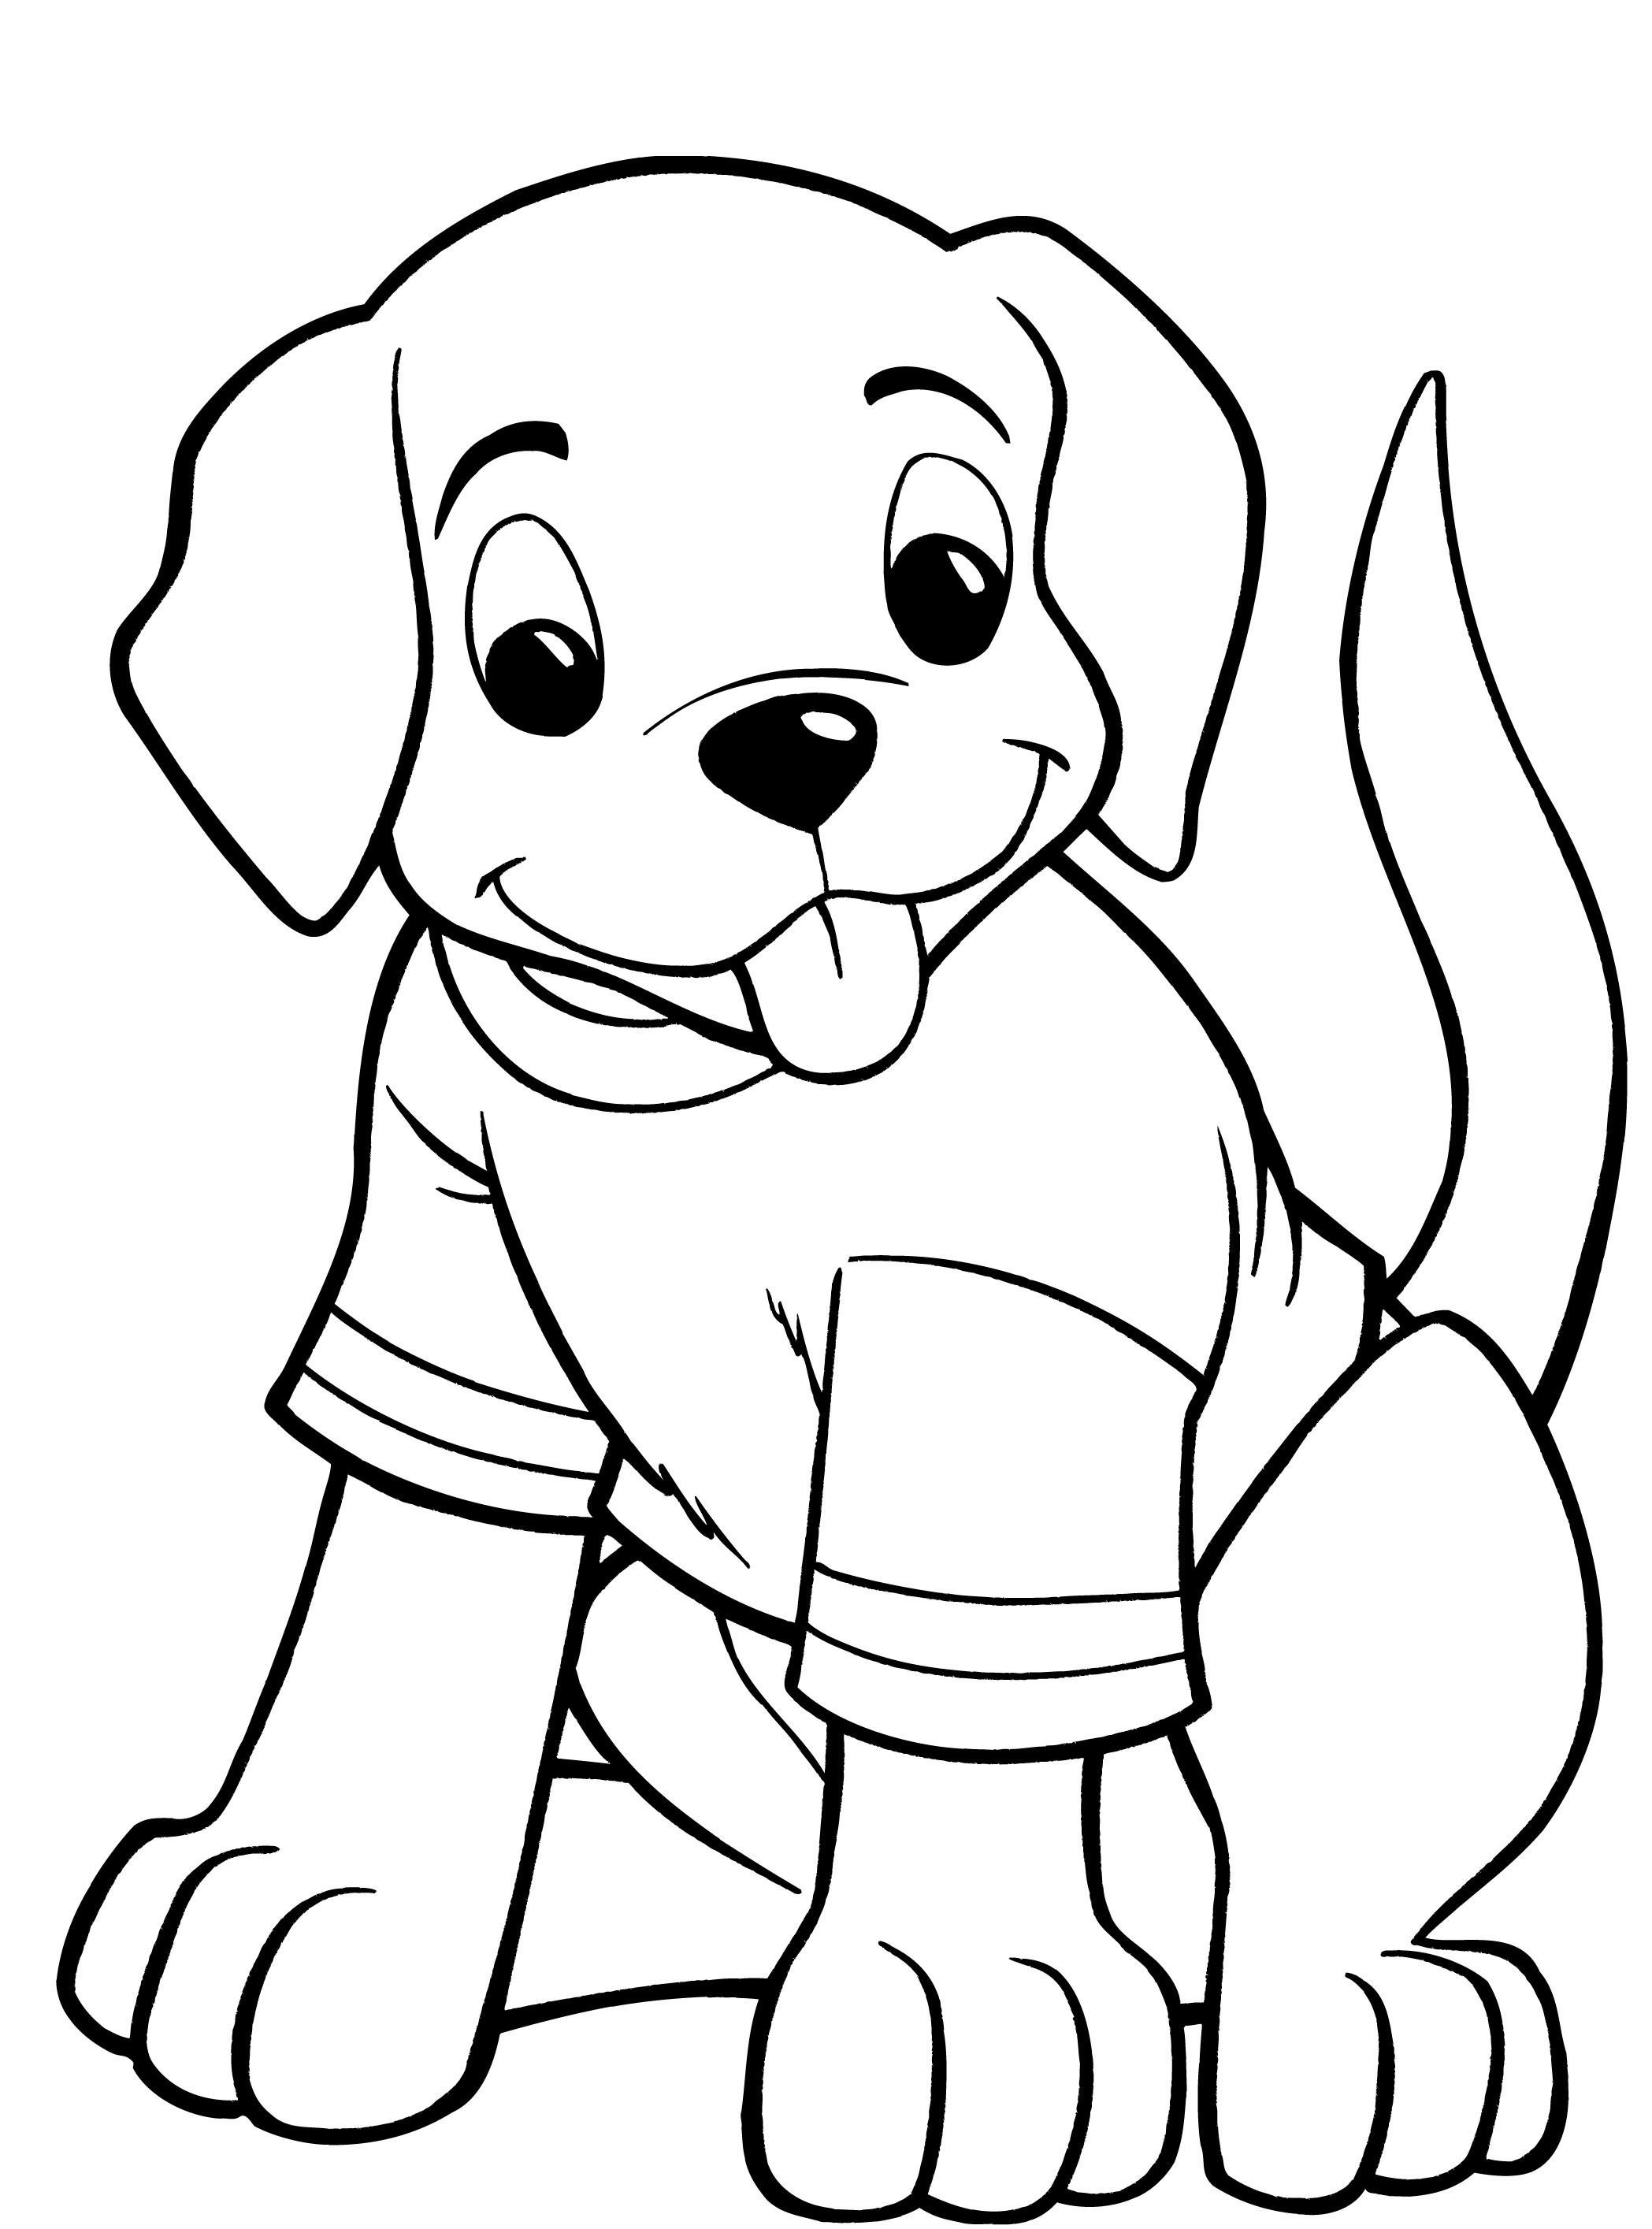 Printable-Puppy-Dog-Coloring-Pages-Atkinson-Flowers-Cute-Pet-For-Free-Baby-Colouring-To-Print-Christmas-Really-Puppies-Adults